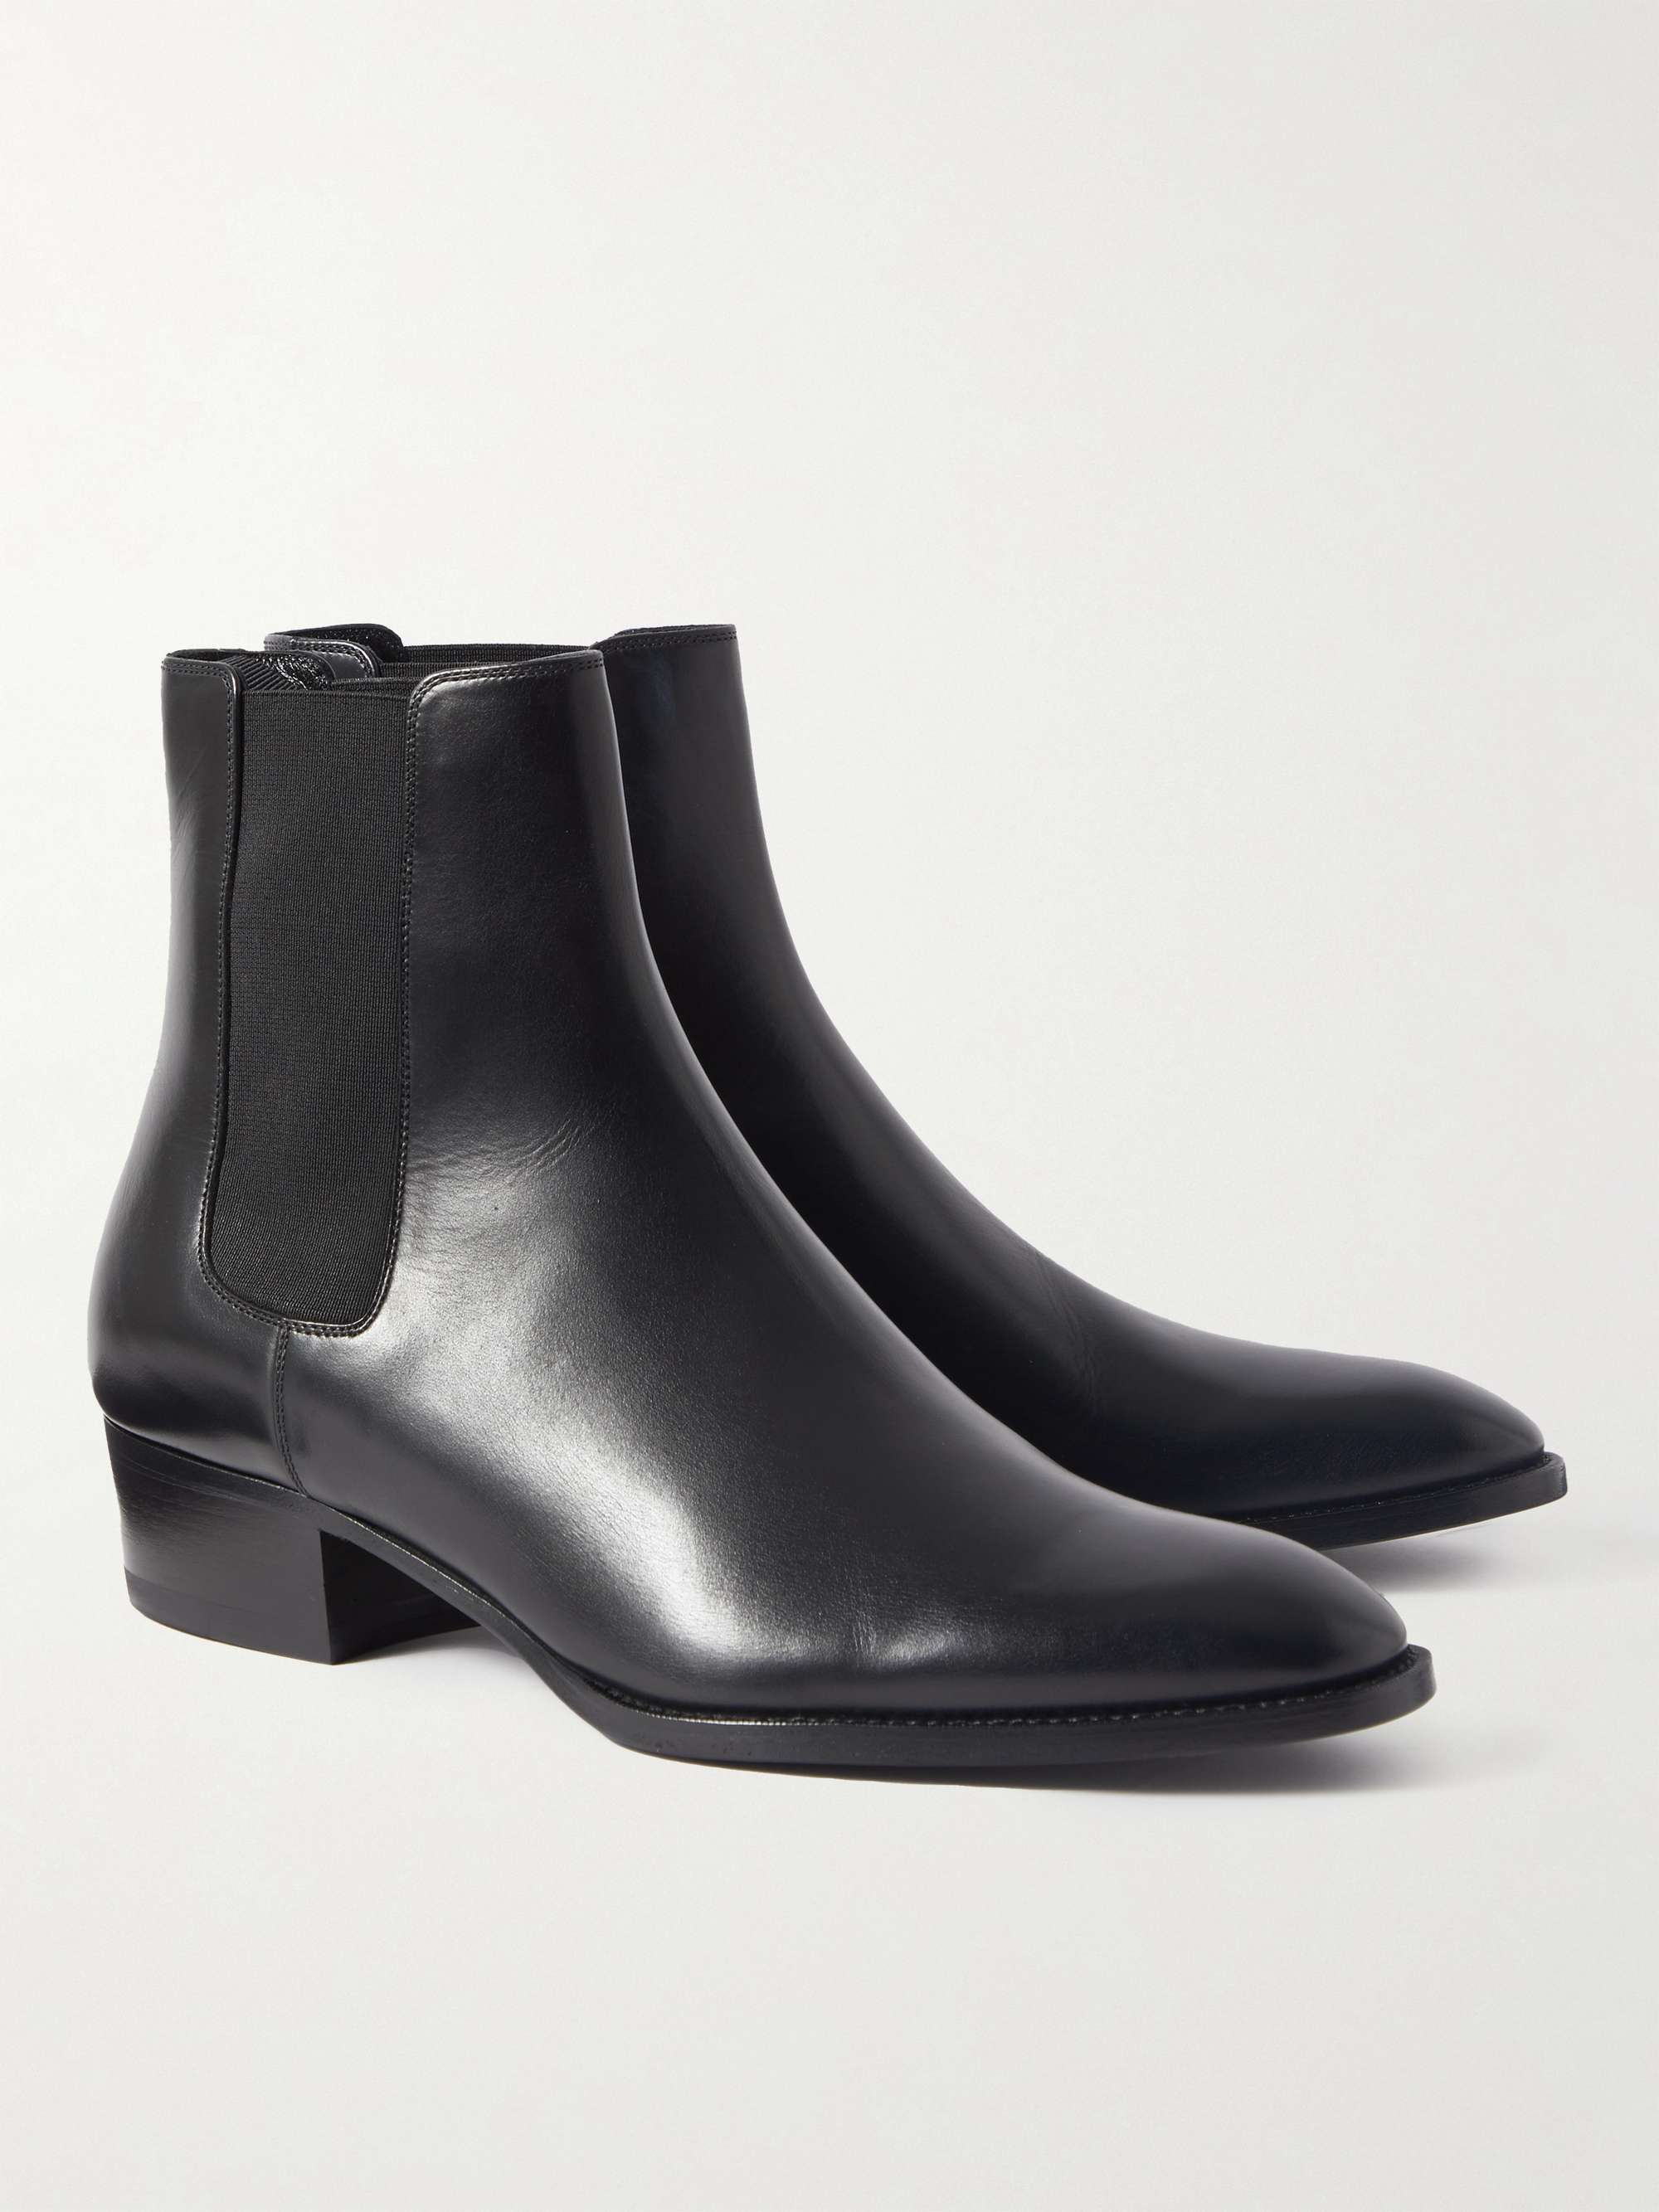 CELINE Drugstore Glossed-Leather Chelsea Boots